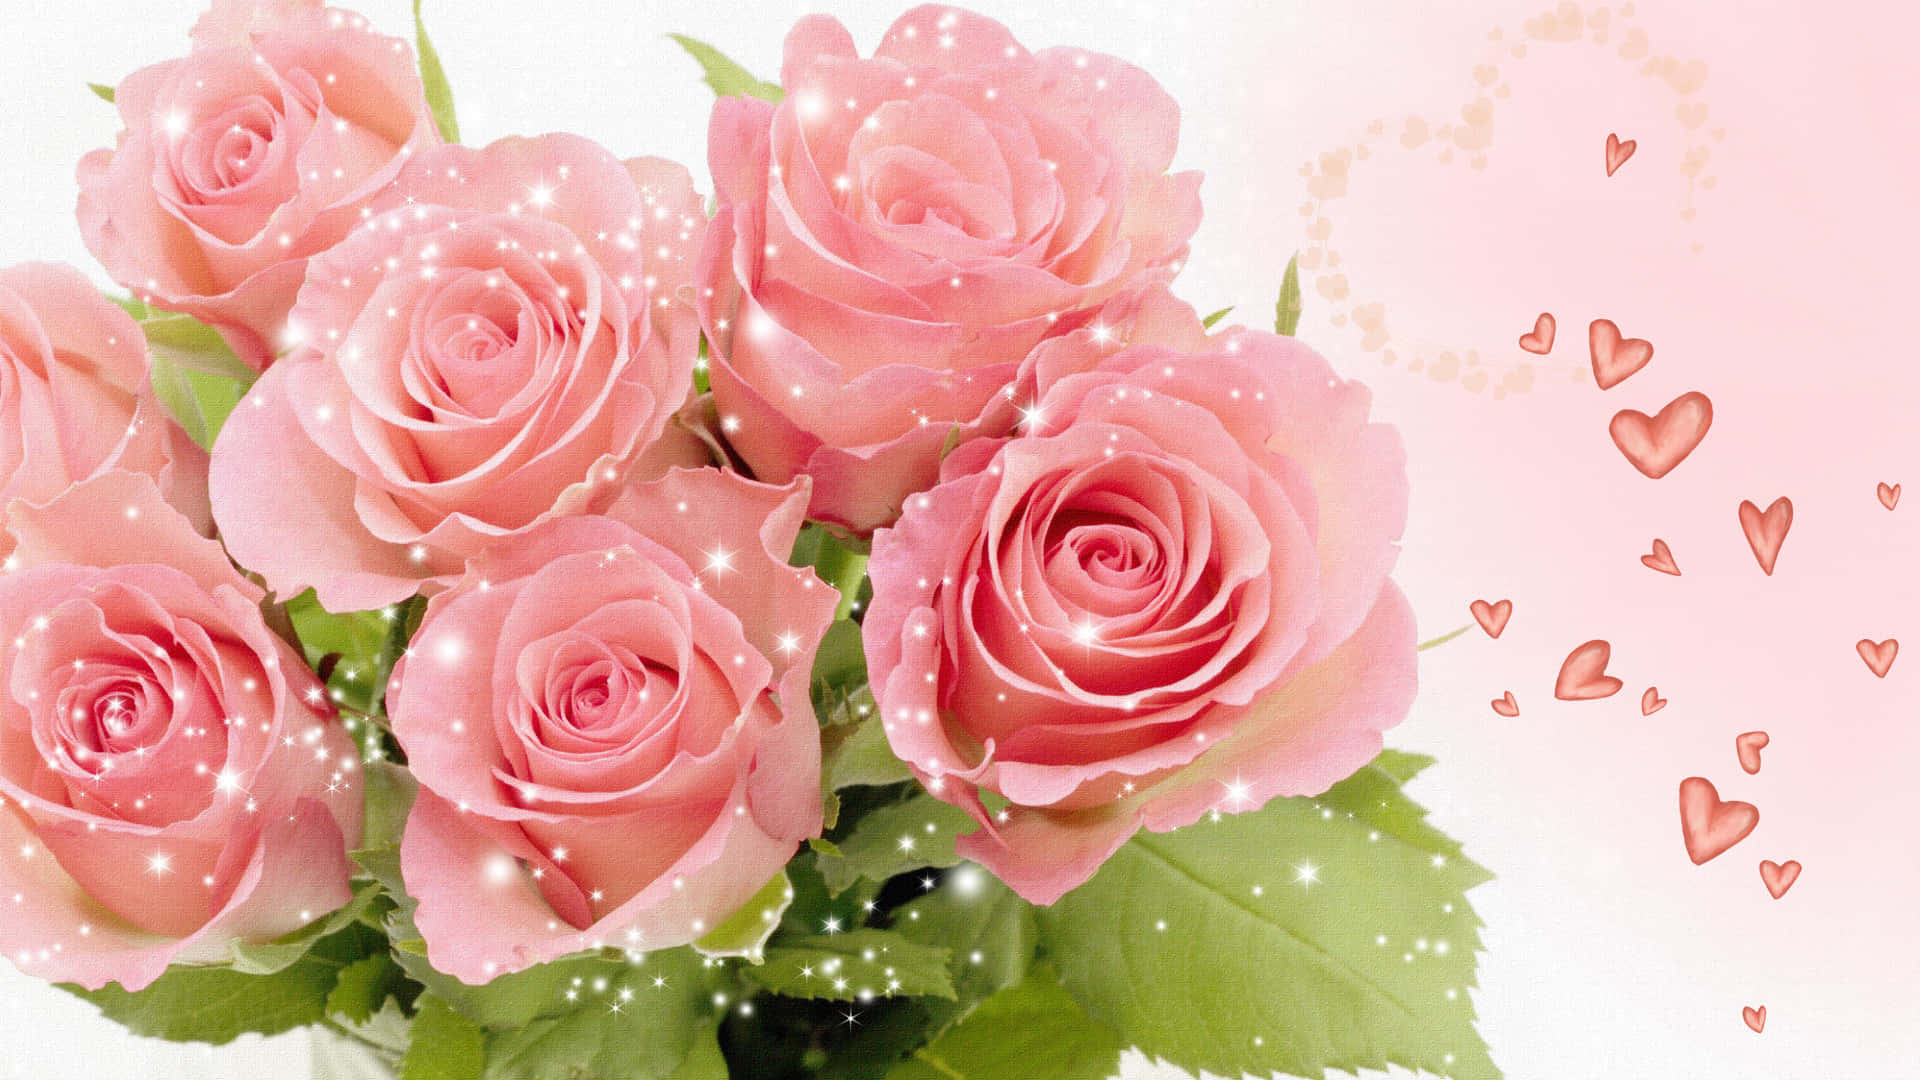 Pink Roses In A Vase With Hearts